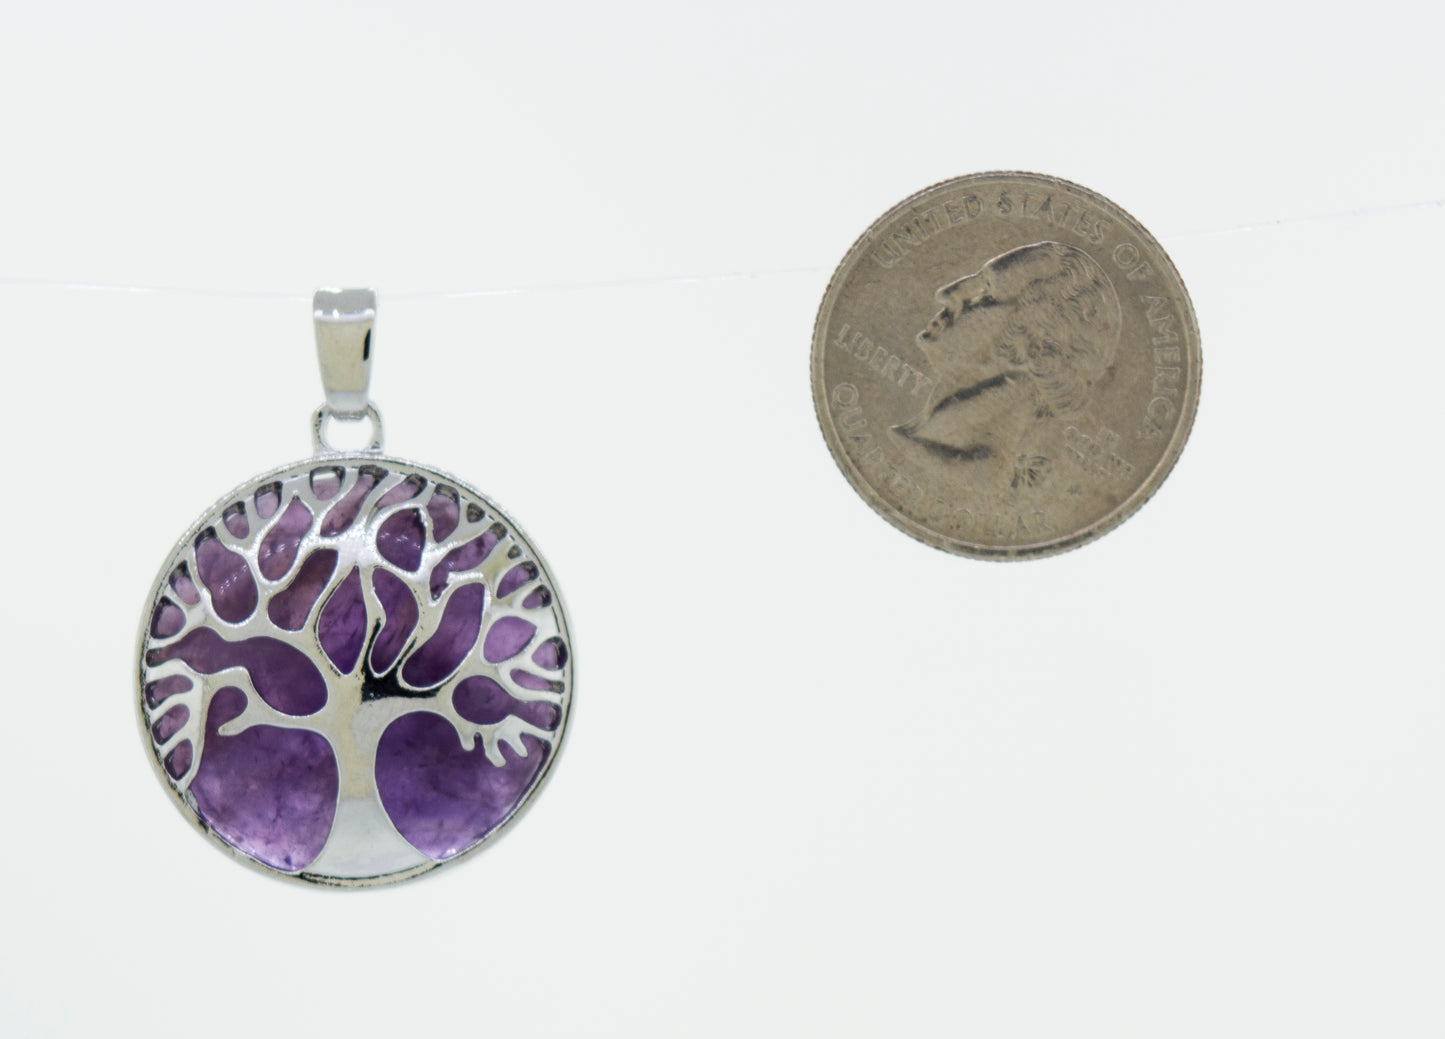 A beautiful Super Silver Tree of Life pendant adorned with a round purple stone.